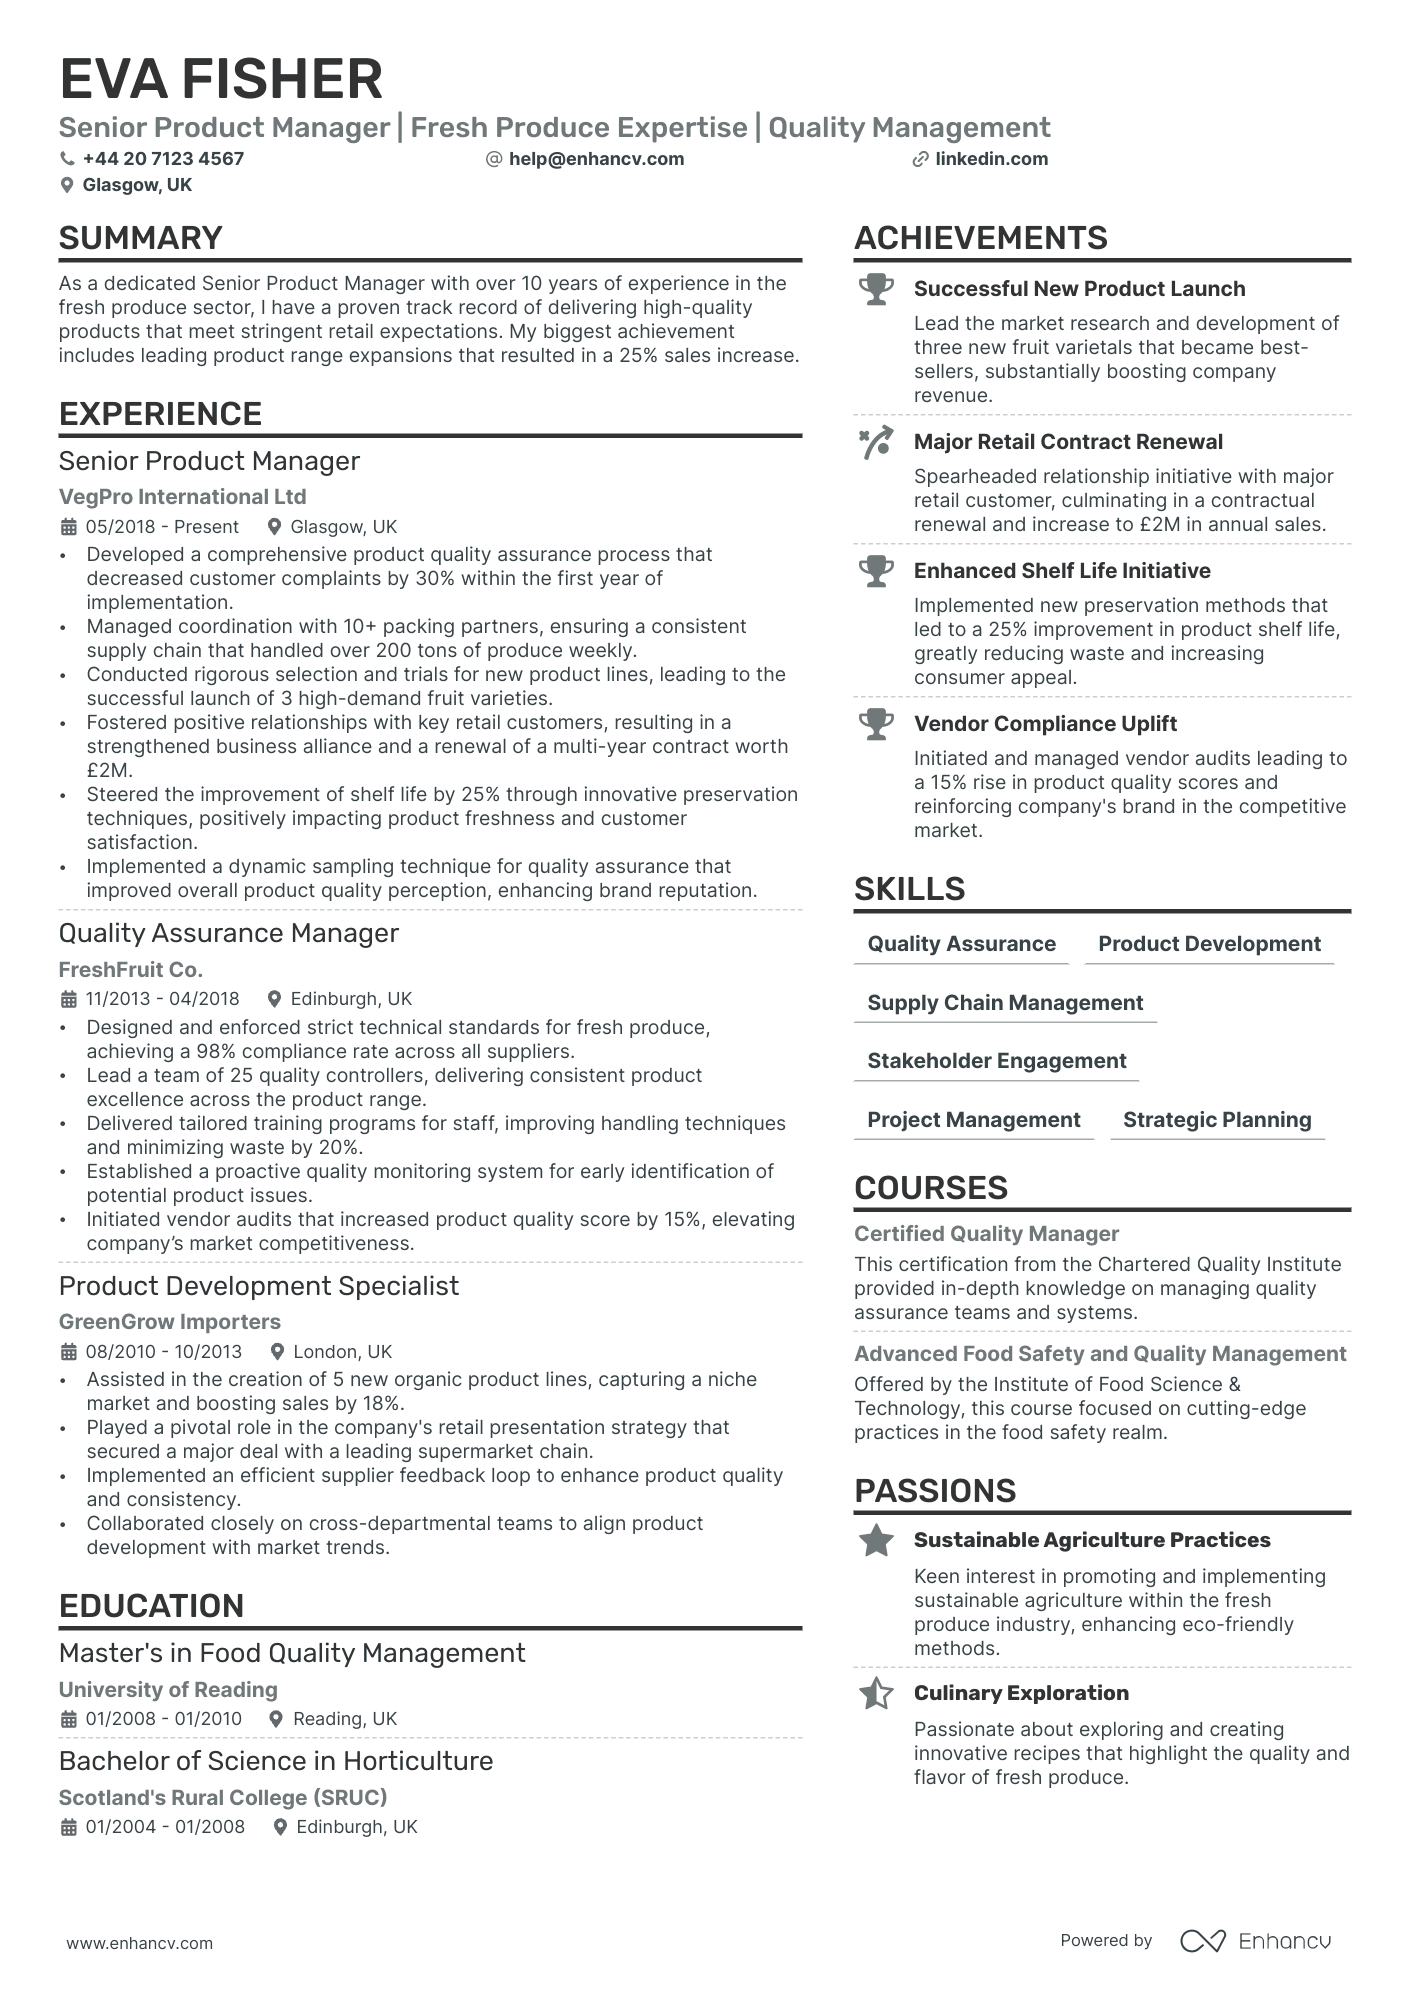 Senior Product Manager cv example